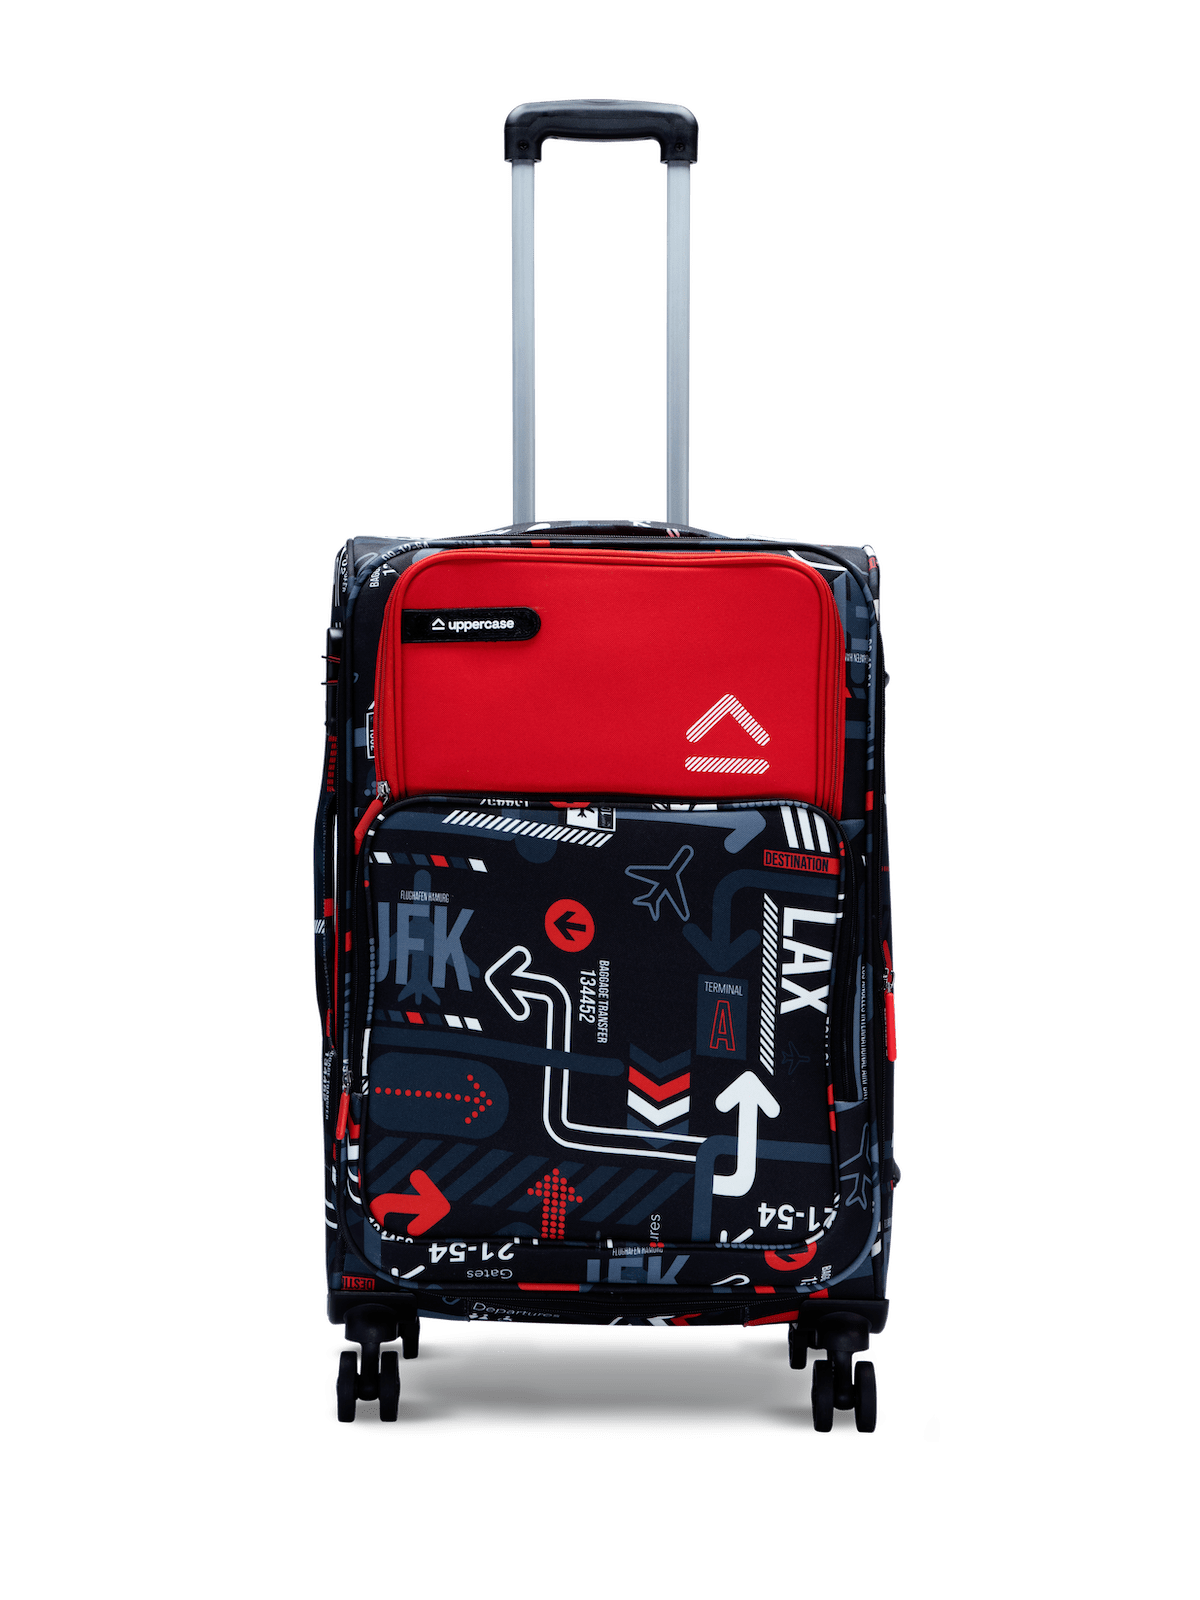 uppercase JFK (Medium) 68cms | Check-in Trolley Bag for travel | Dust-Resistant Eco-Soft Polyester Printed Luggage | Sustainable 8 Wheel Suitcase for Men & Women |2500 Days Warranty (Red)